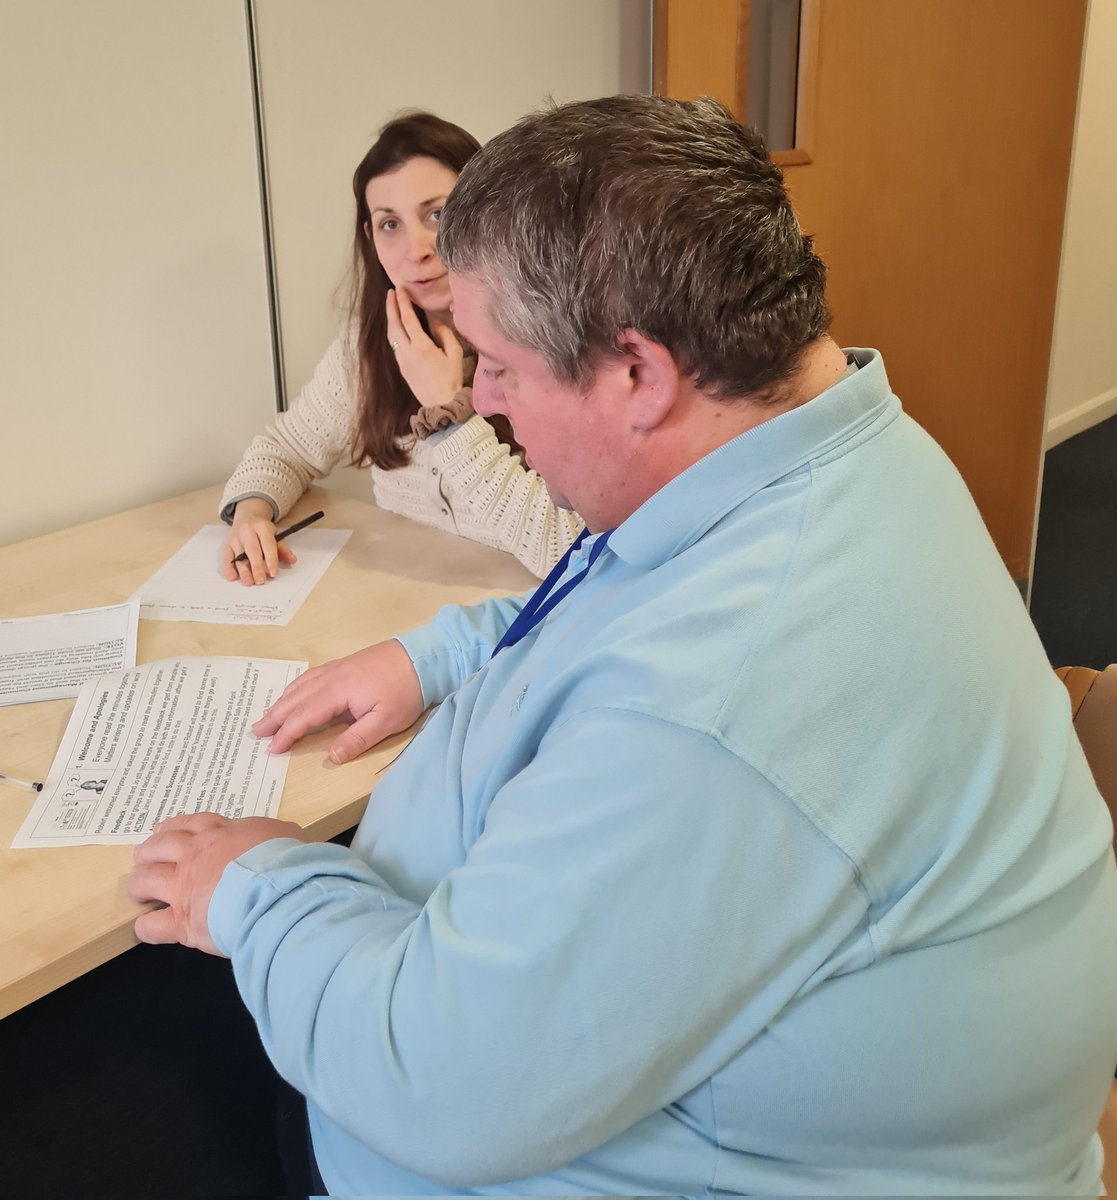 It is a busy day here at the #Cromer office. Robert is working with our social work student Marta looking at his actions from the Management Committee last month #UserLed